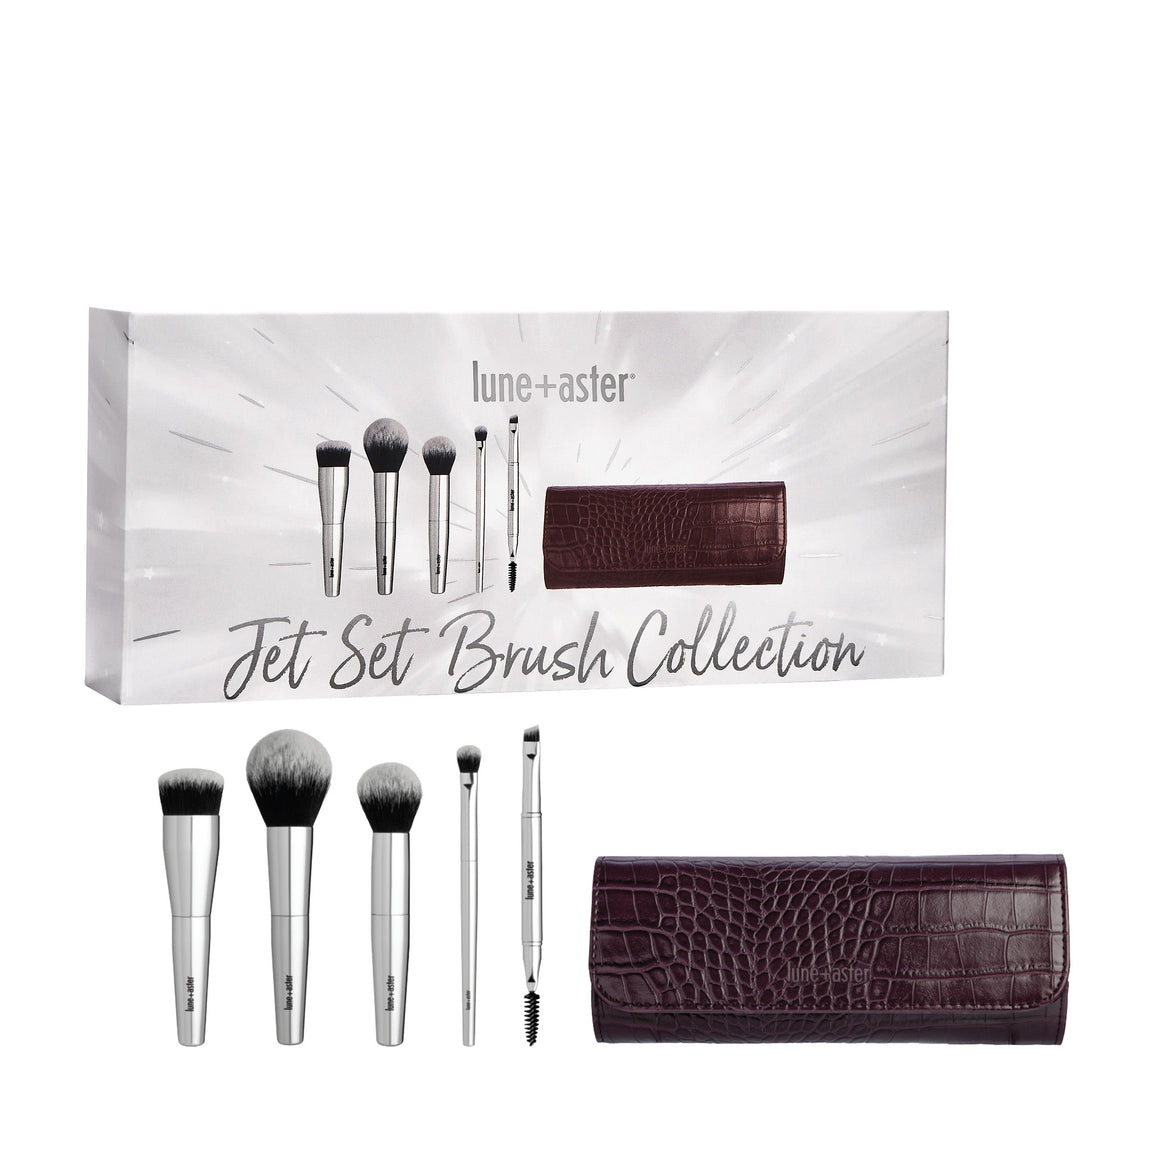 Lune+Aster Jet Set Brush Collection